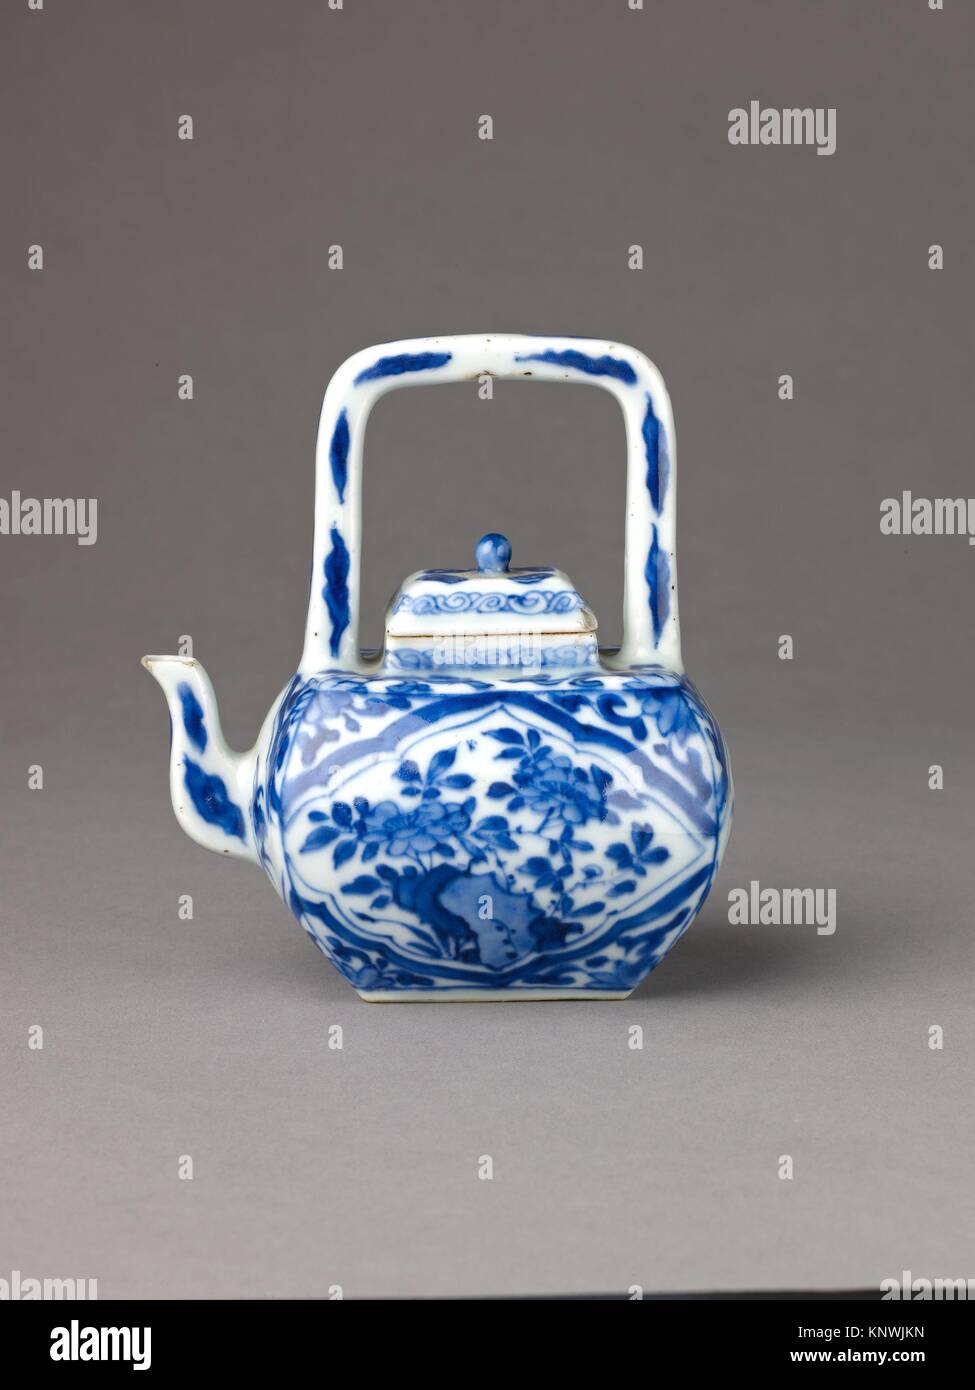 Small covered wine pot or teapot. Artist: Chinese , Qing Dynasty, Kangxi period; Date: 1662-1722; Culture: Chinese; Medium: Porcelain painted in Stock Photo